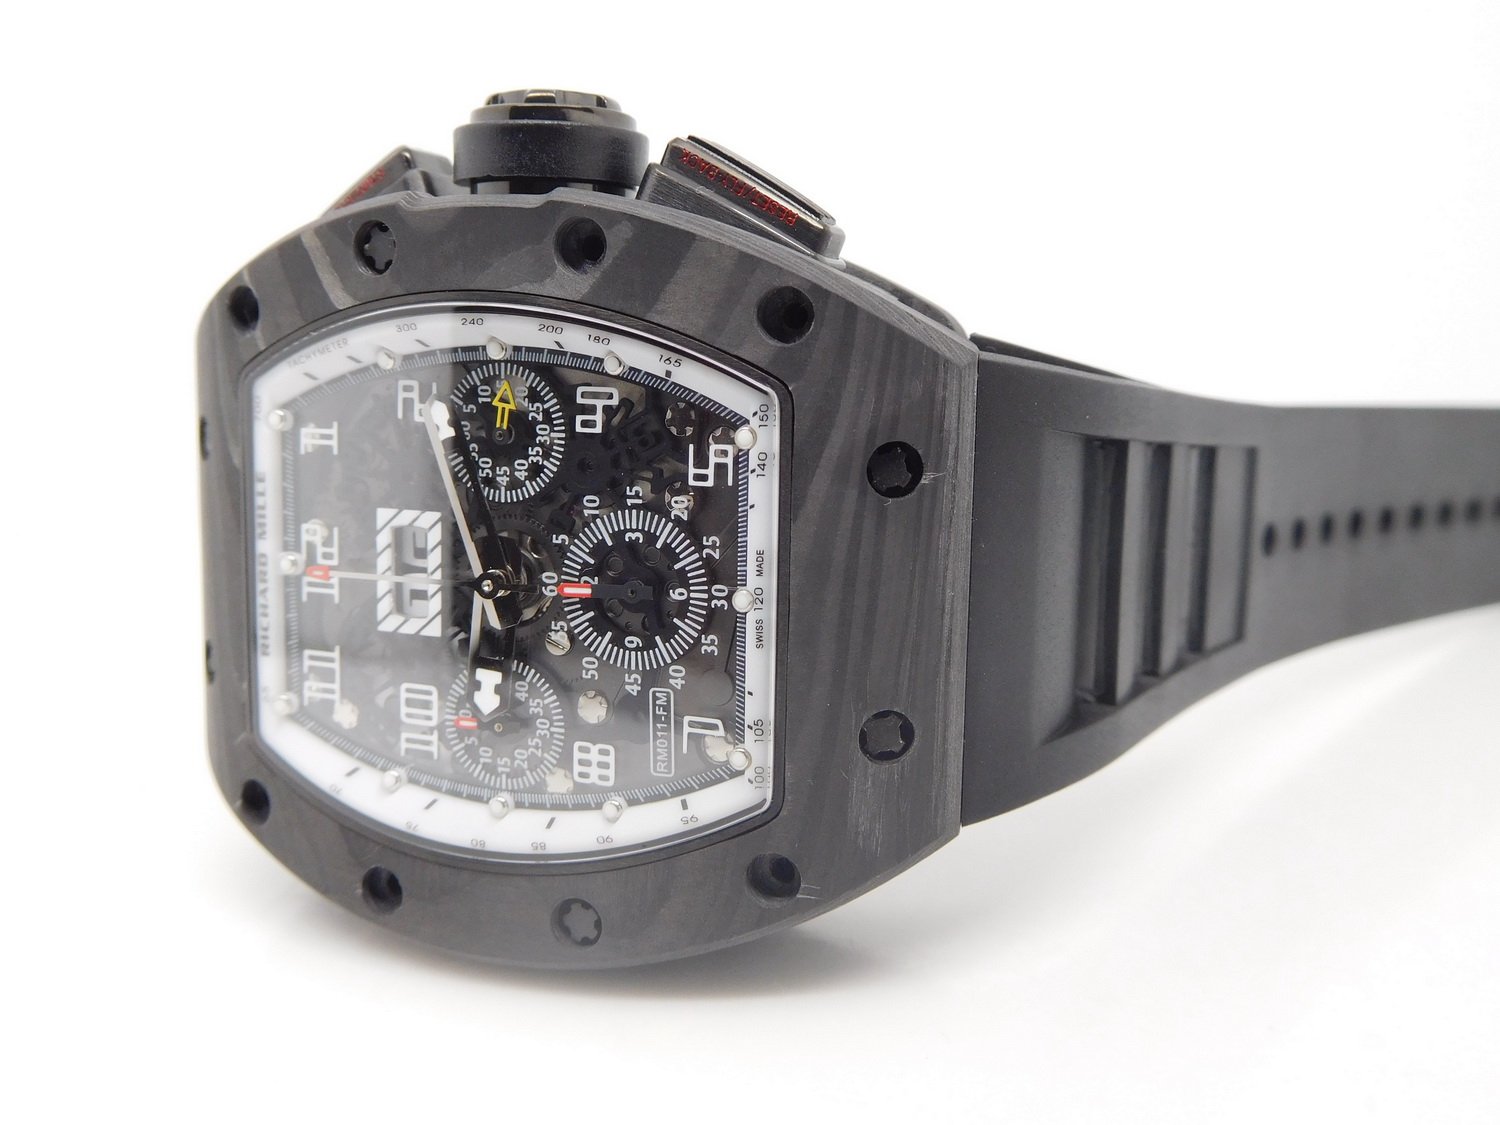 Richard Mille RM 011 Flyback Chronograph Carbon NTPT